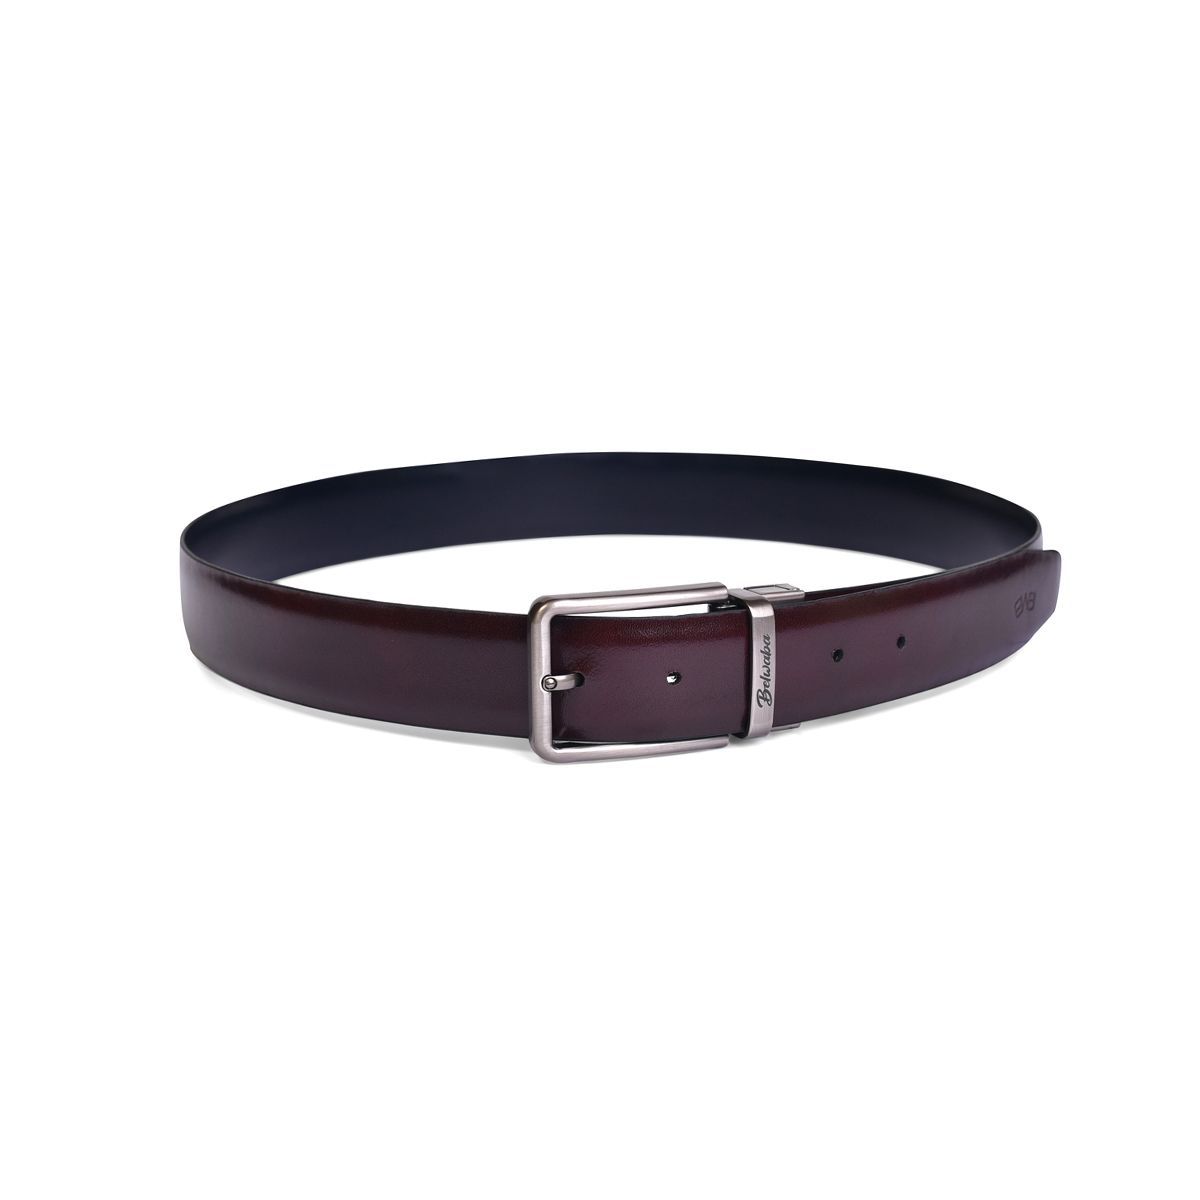 Belwaba Genuine Italian Leather Navy Mens Belt With Shiny Gunmetal Finished Buckle (40) (Navy Blue) At Nykaa, Best Beauty Products Online